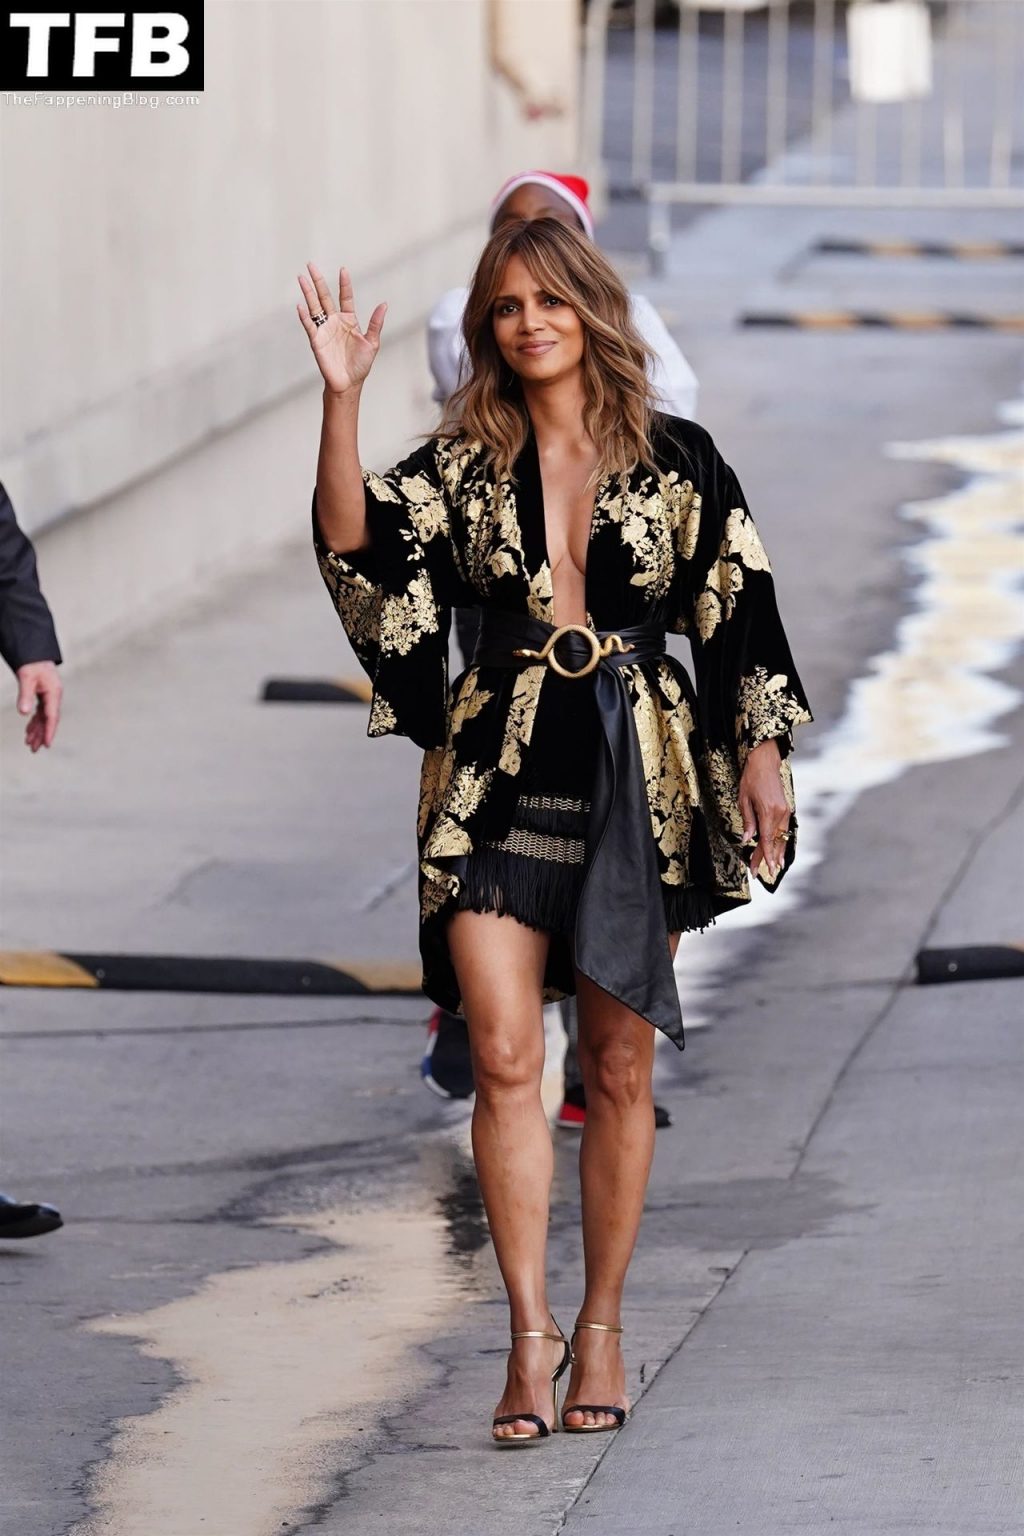 Halle Berry Stuns the Crowd at Jimmy Kimmel Live! in a Sexy Black and Gold Dress (147 Photos)